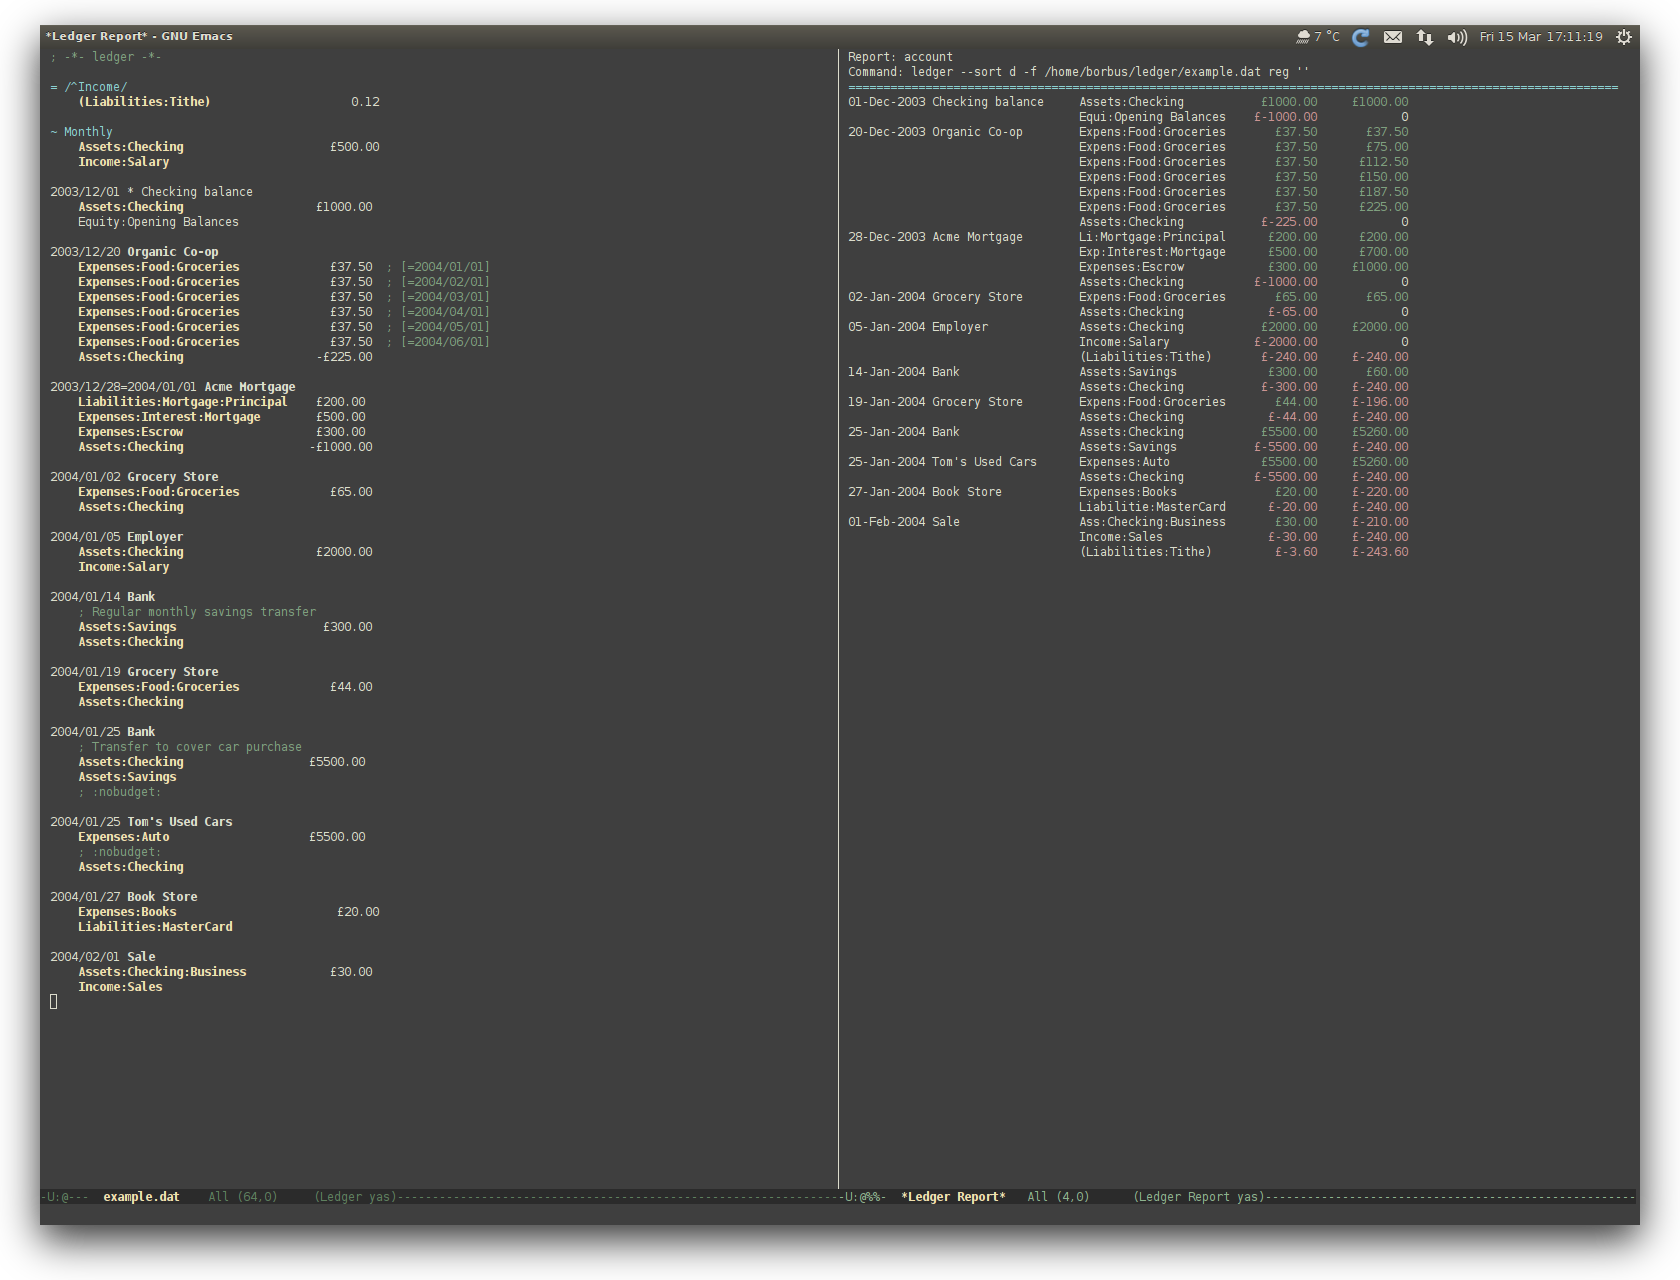 /TakeV/spacemacs/media/commit/c5528a50315a228c8484ece9647c228fc44cedad/layers/finance/img/ledger.png